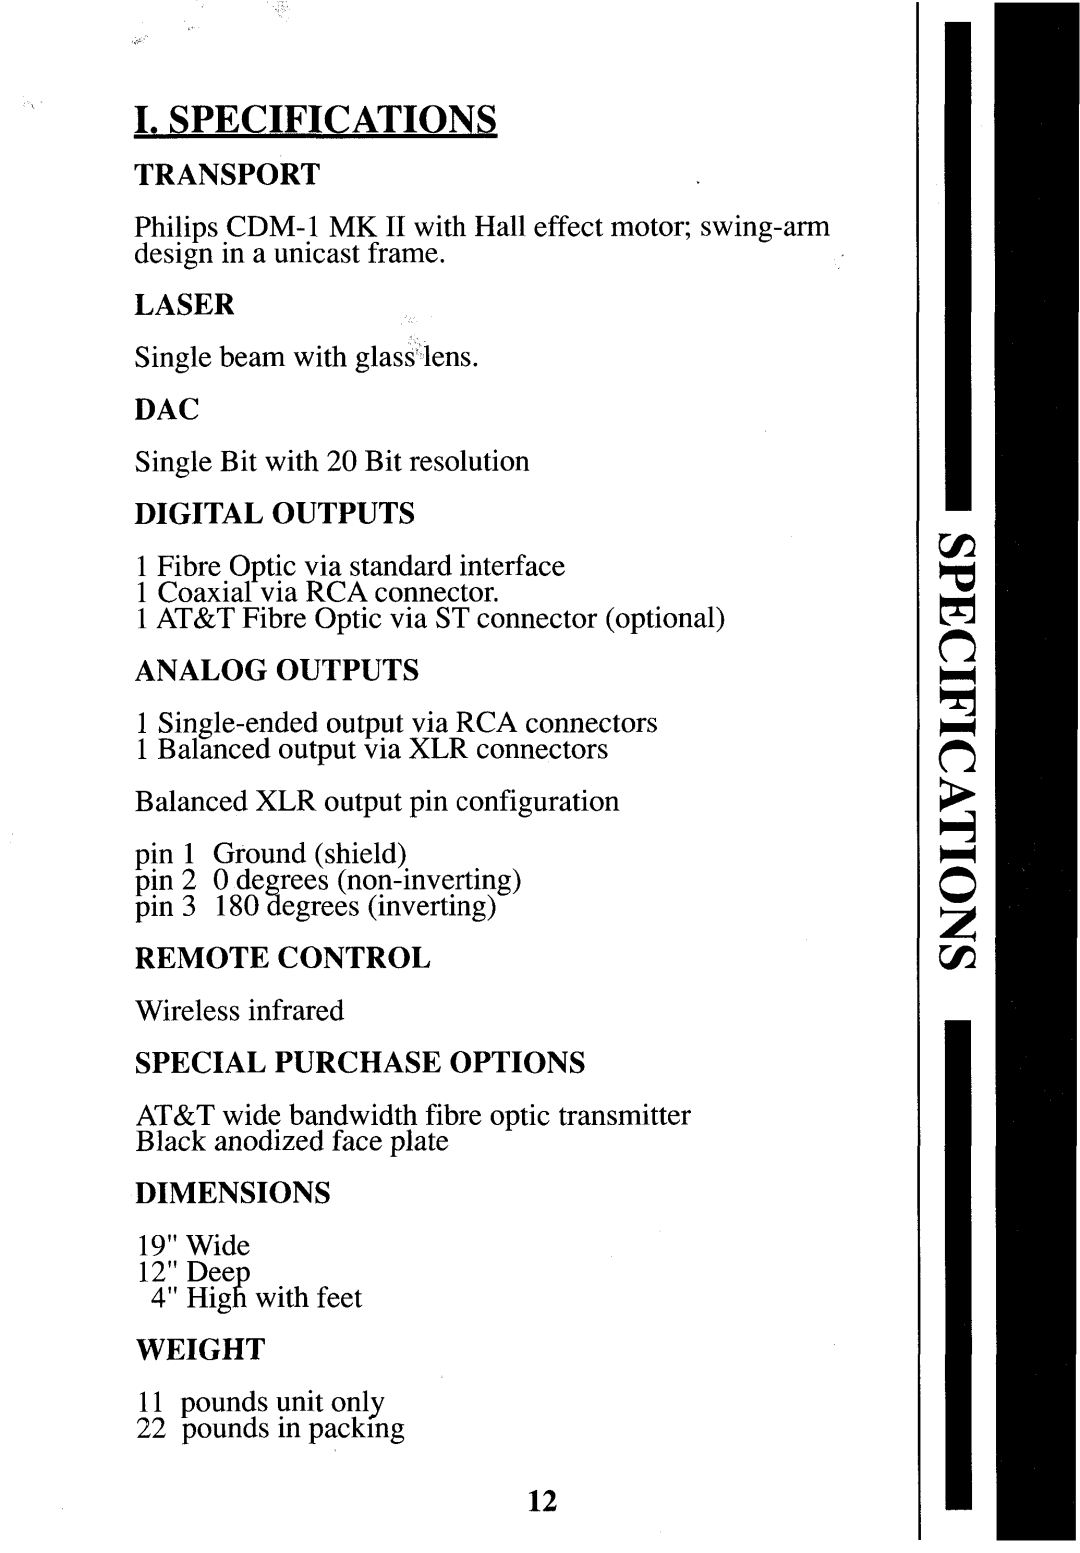 Krell Industries CD-1 manual I.Specifications, Transport, Laser, Single Bit with 20 Bit resolution, Dimensions 